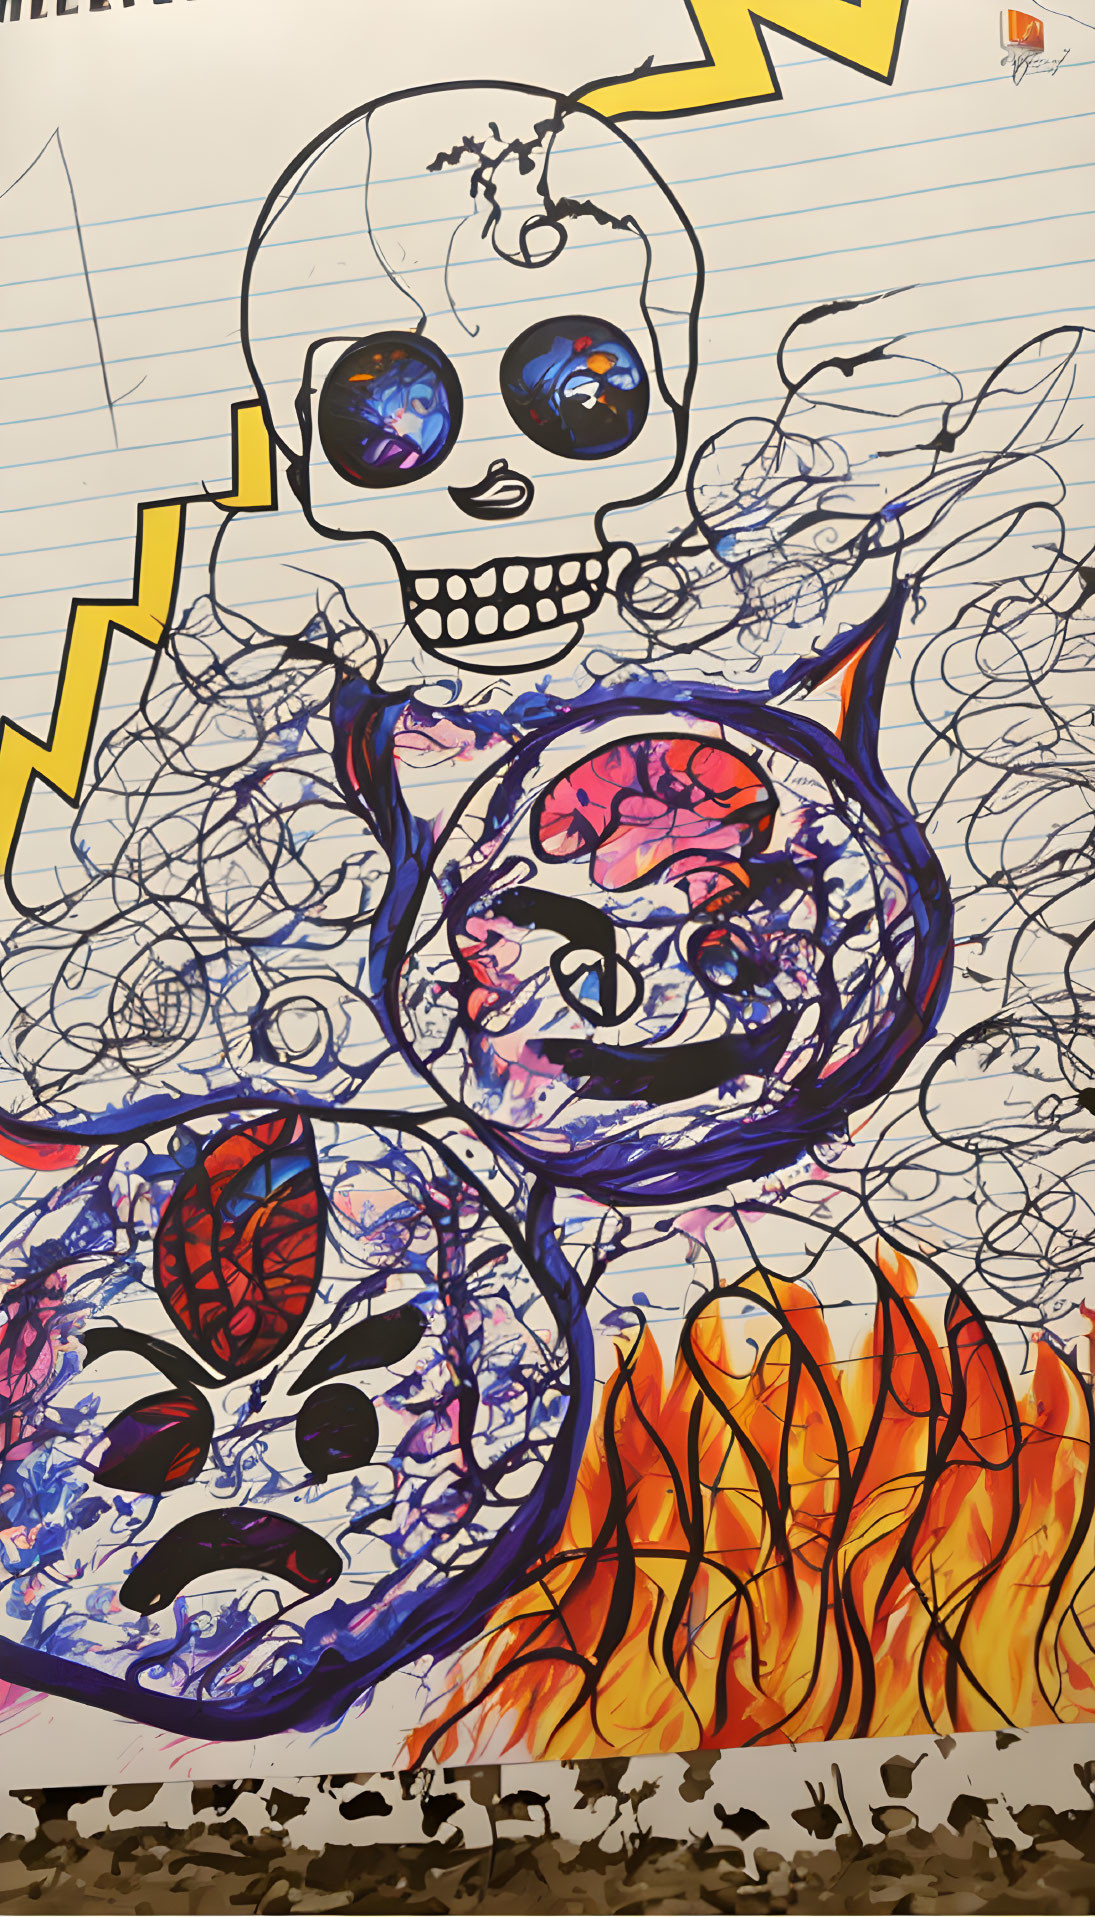 Skull graffiti art with intertwined circles and doodle flames background